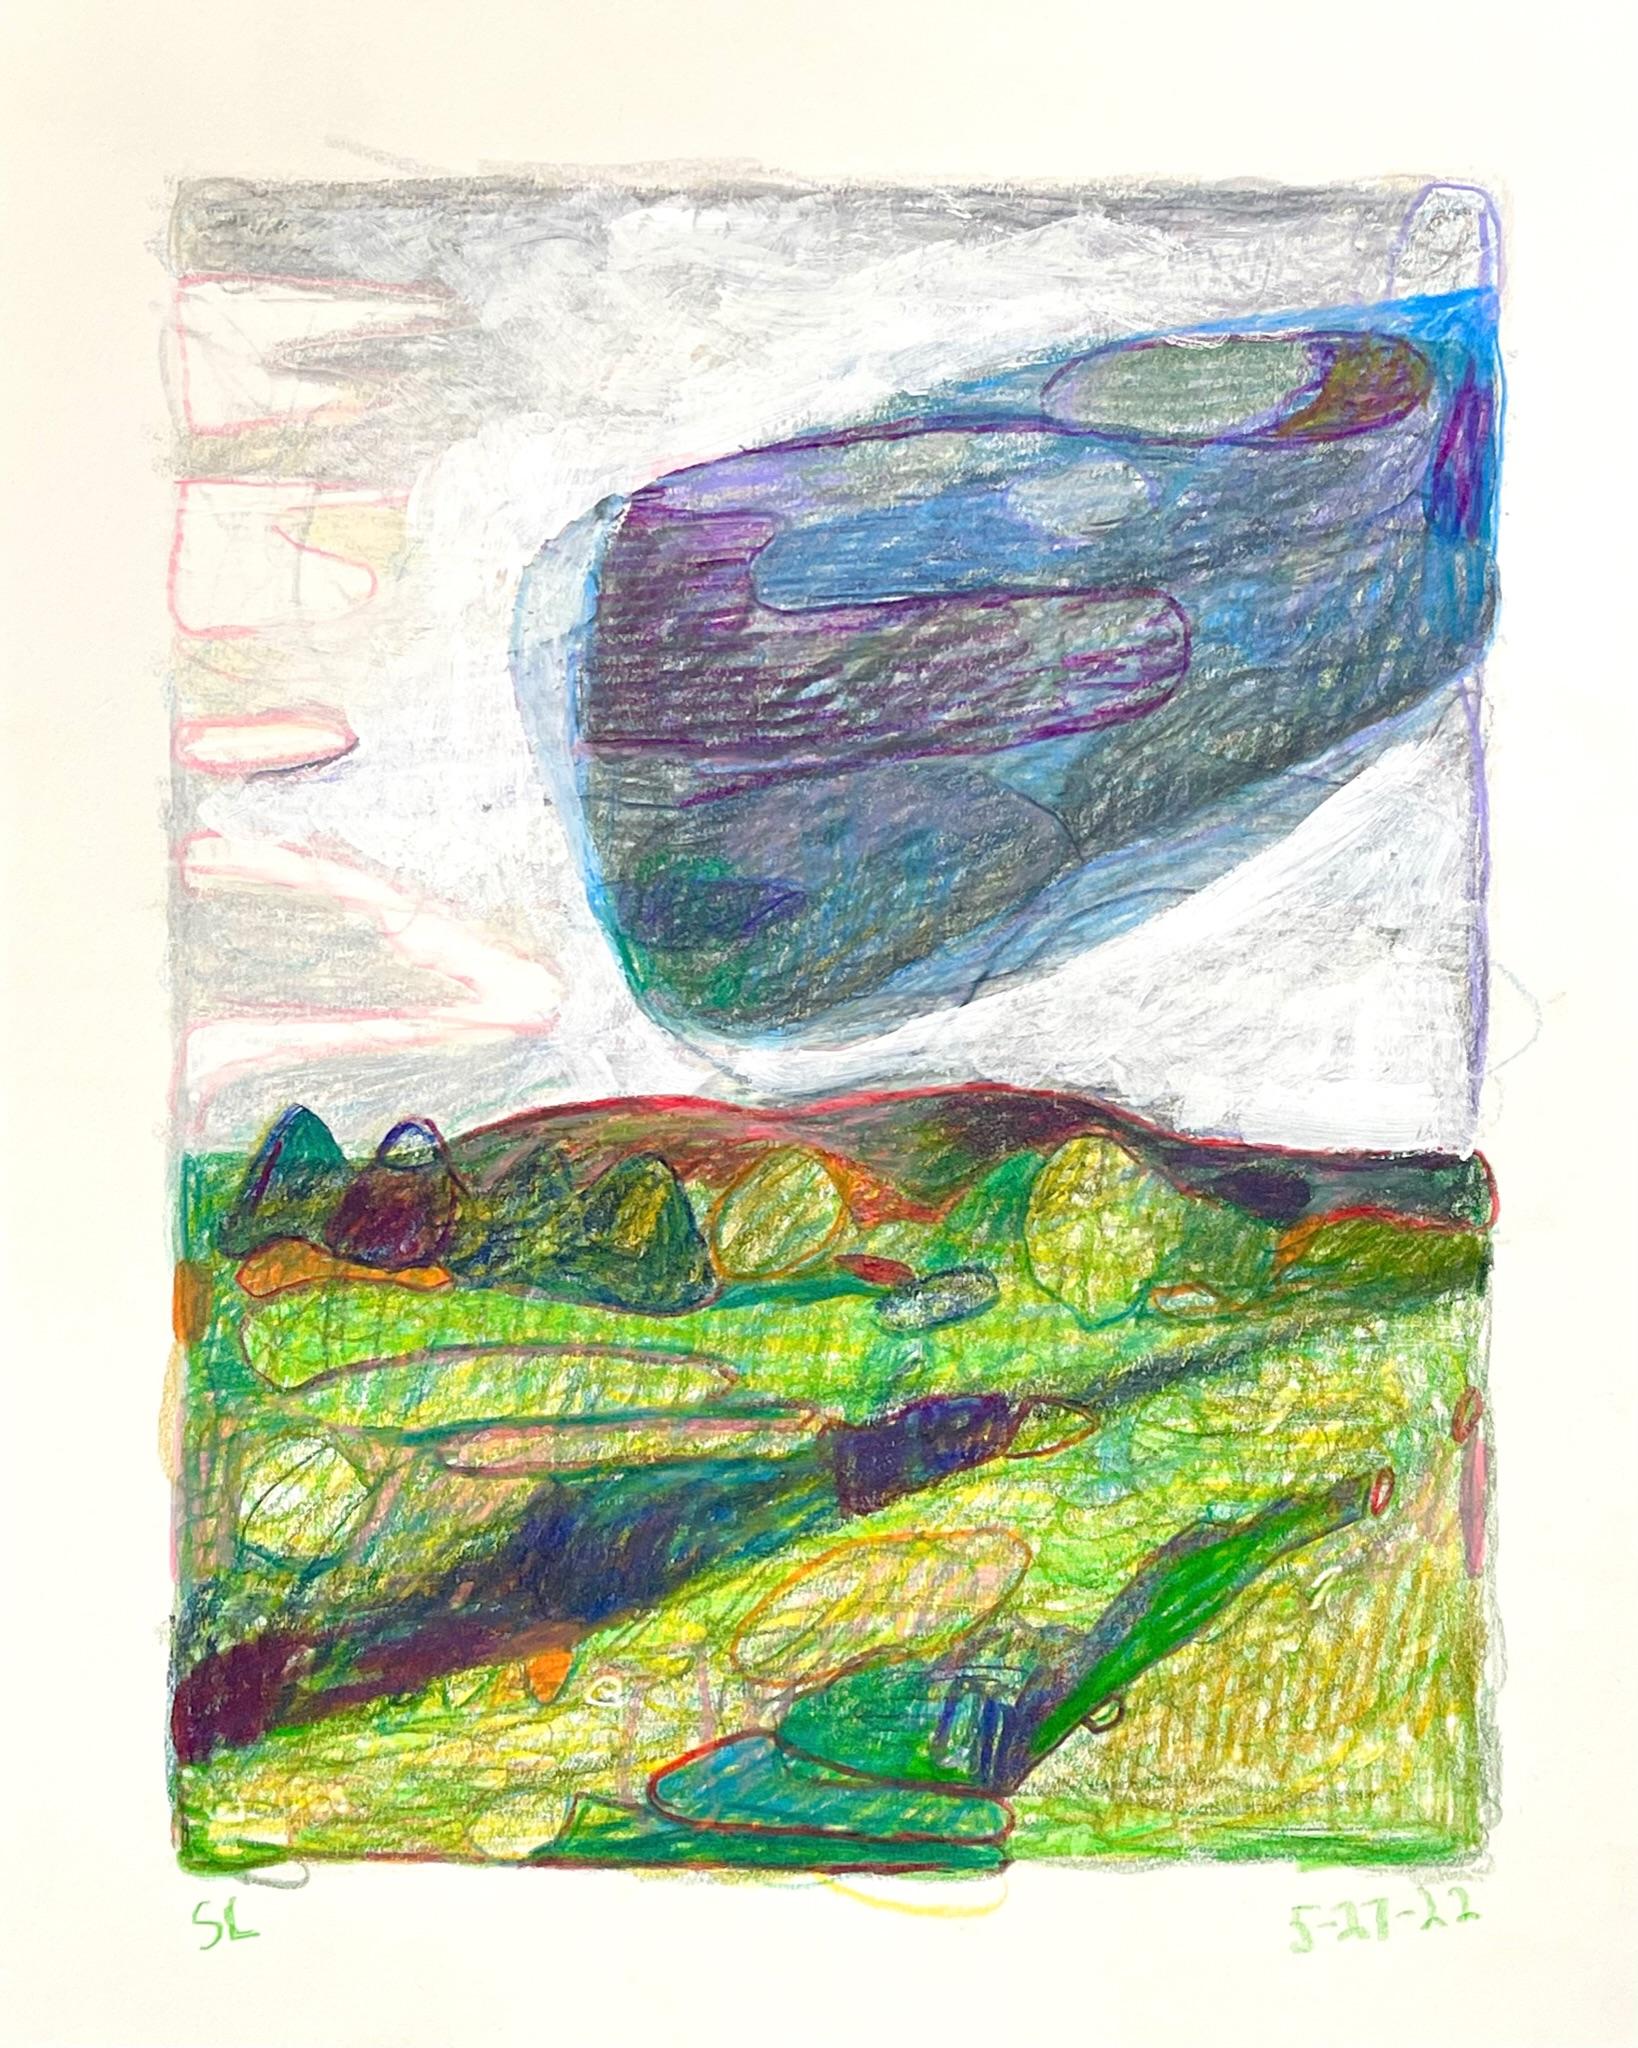 Sandy Litchfield Landscape Art - 5-27-22, Impressionist, abstracted landscape drawing with colored pencil